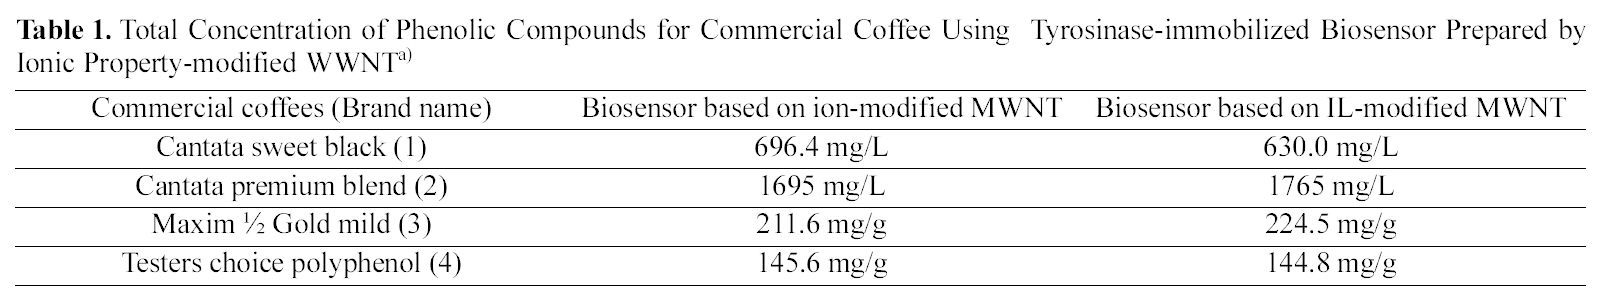 Total Concentration of Phenolic Compounds for Commercial Coffee Using Tyrosinase-immobilized Biosensor Prepared by Ionic Property-modified WWNTa)